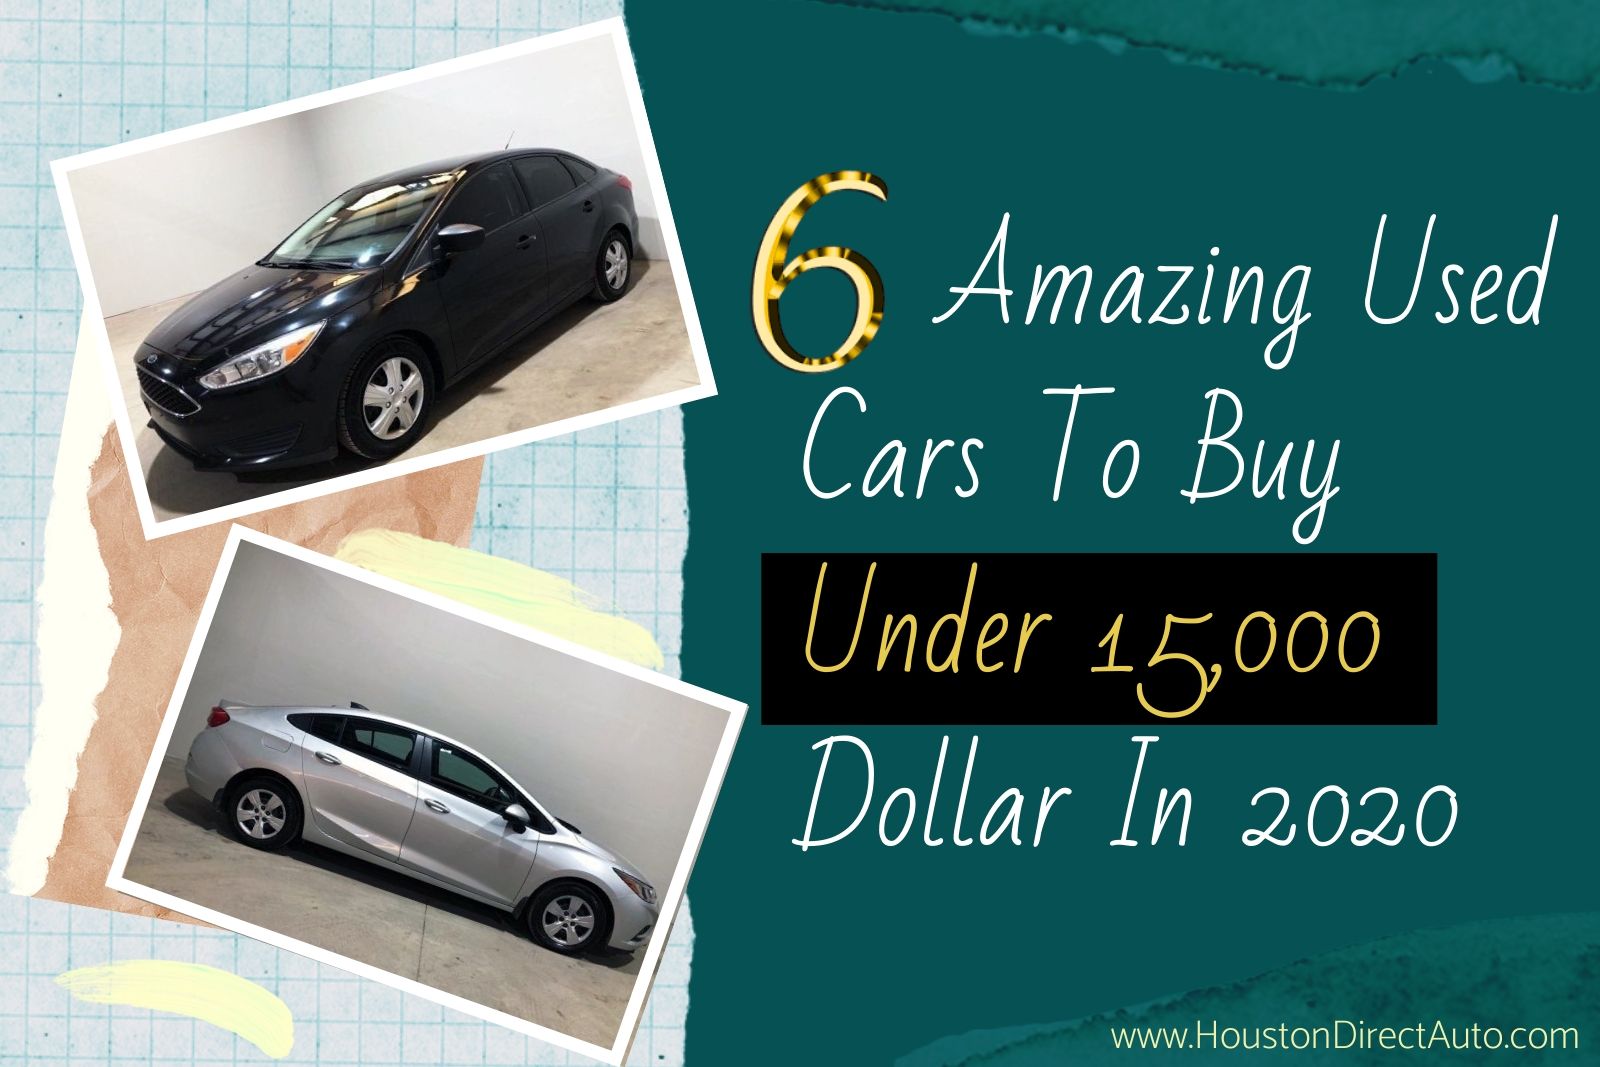 Amazing Used Cars To Buy Under 15,000 Dollar In 2020